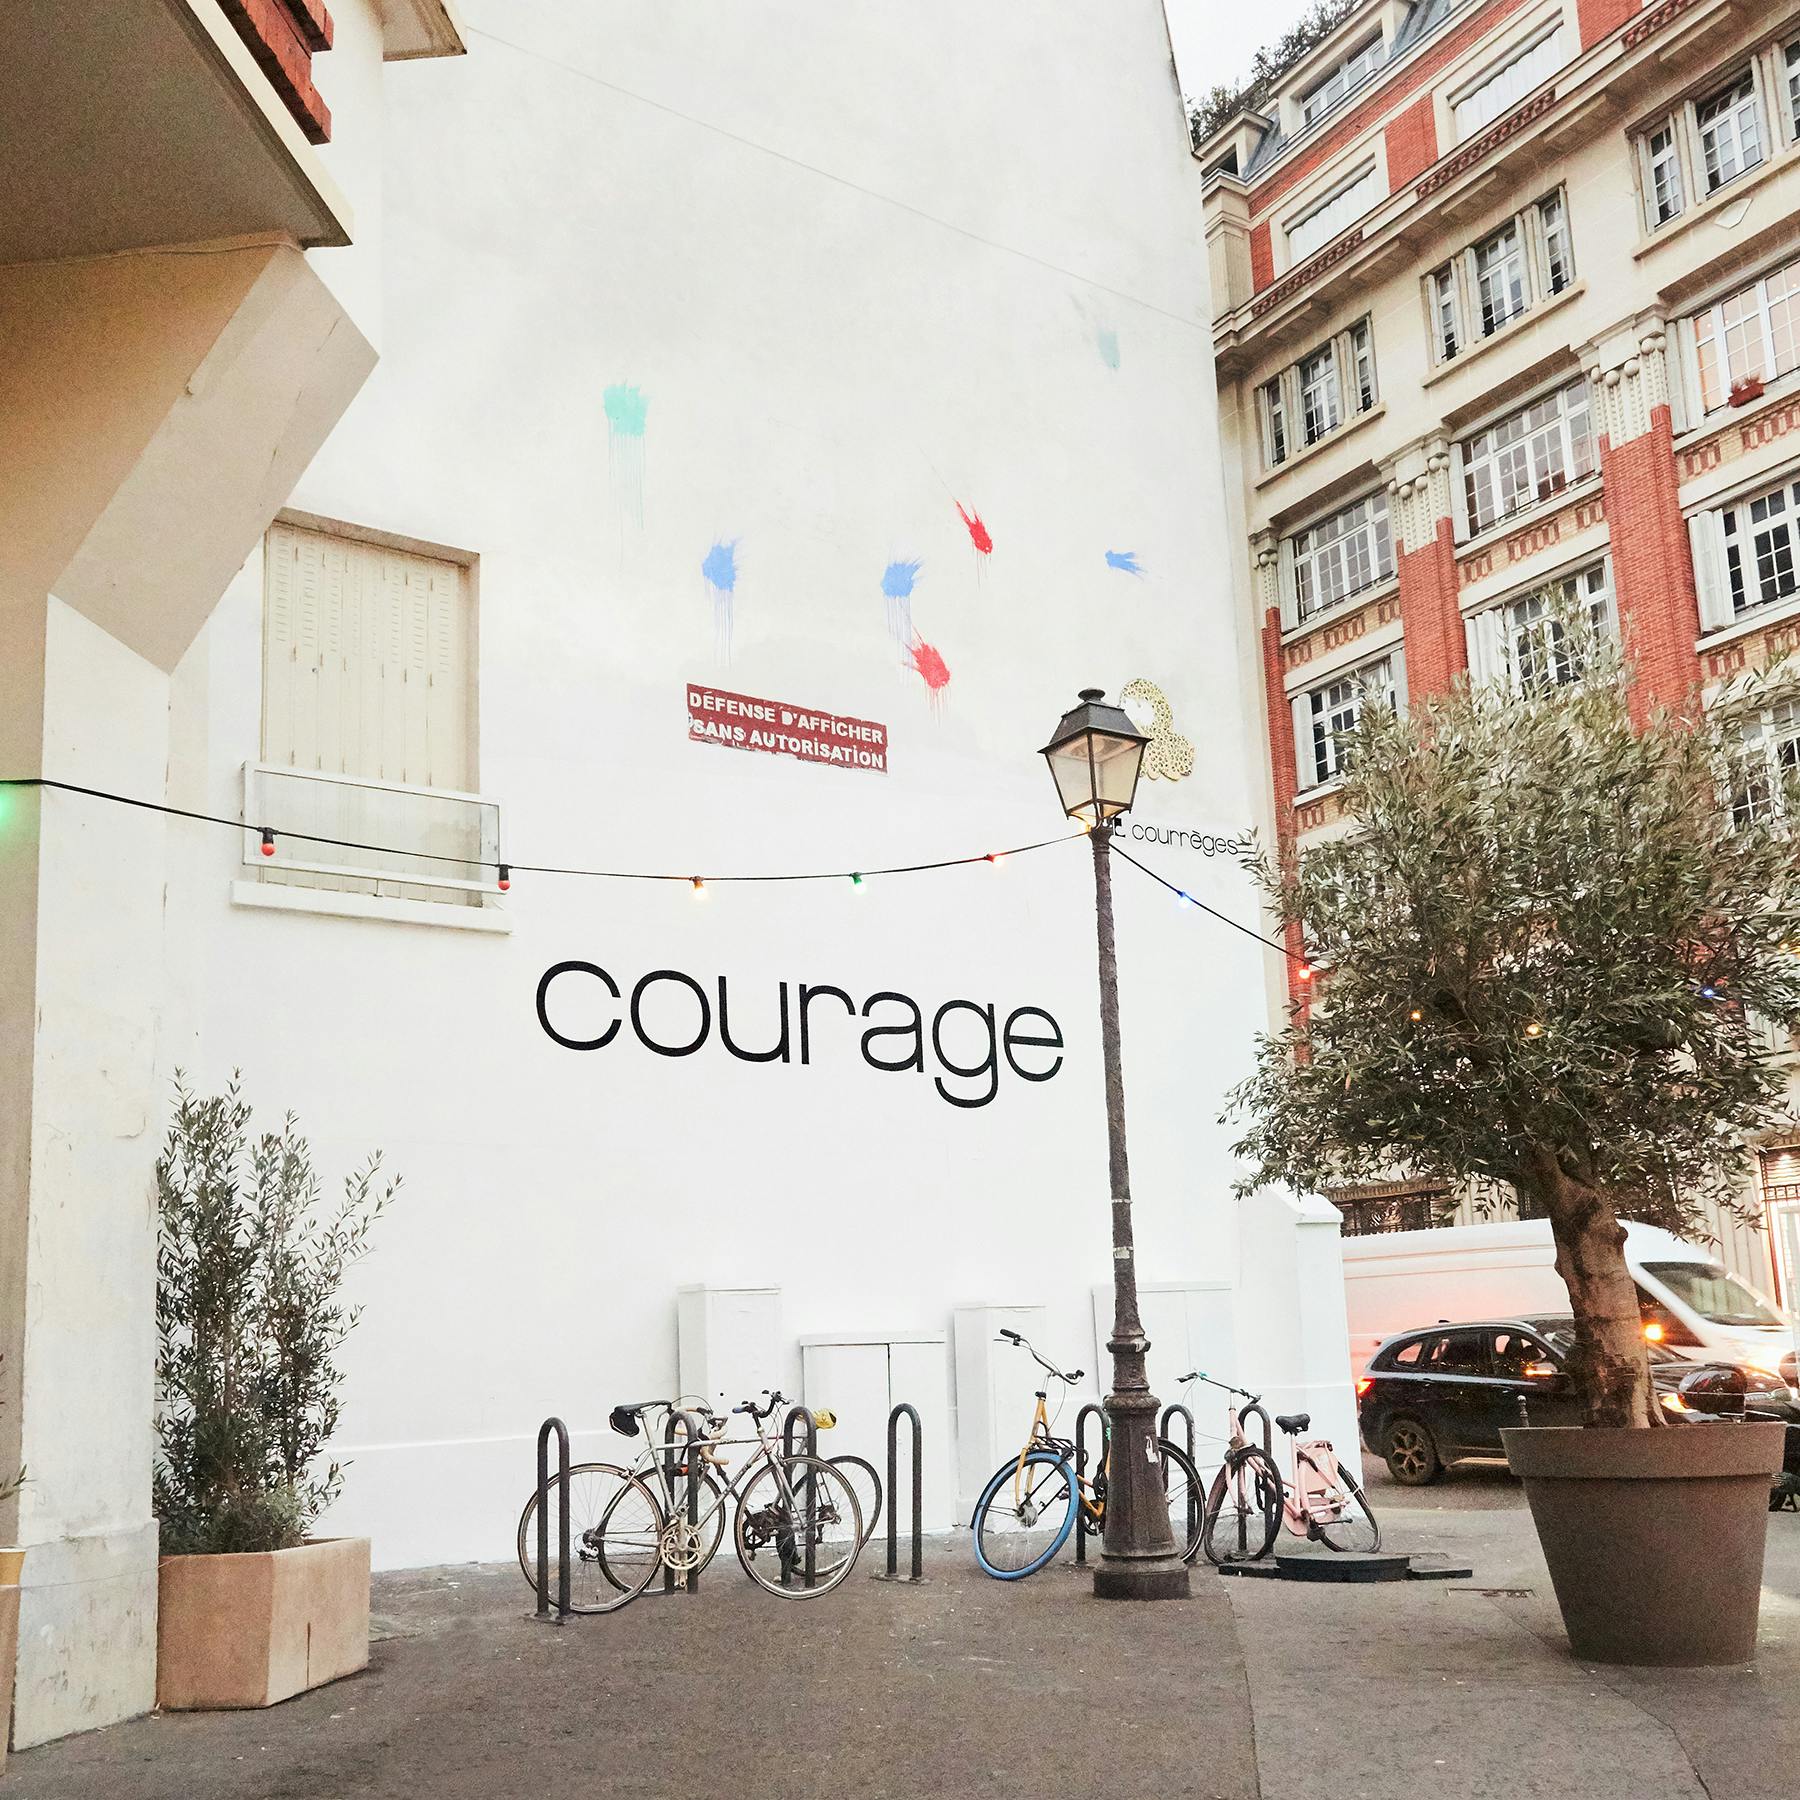 COURREGES COURAGE AD CAMPAIGN